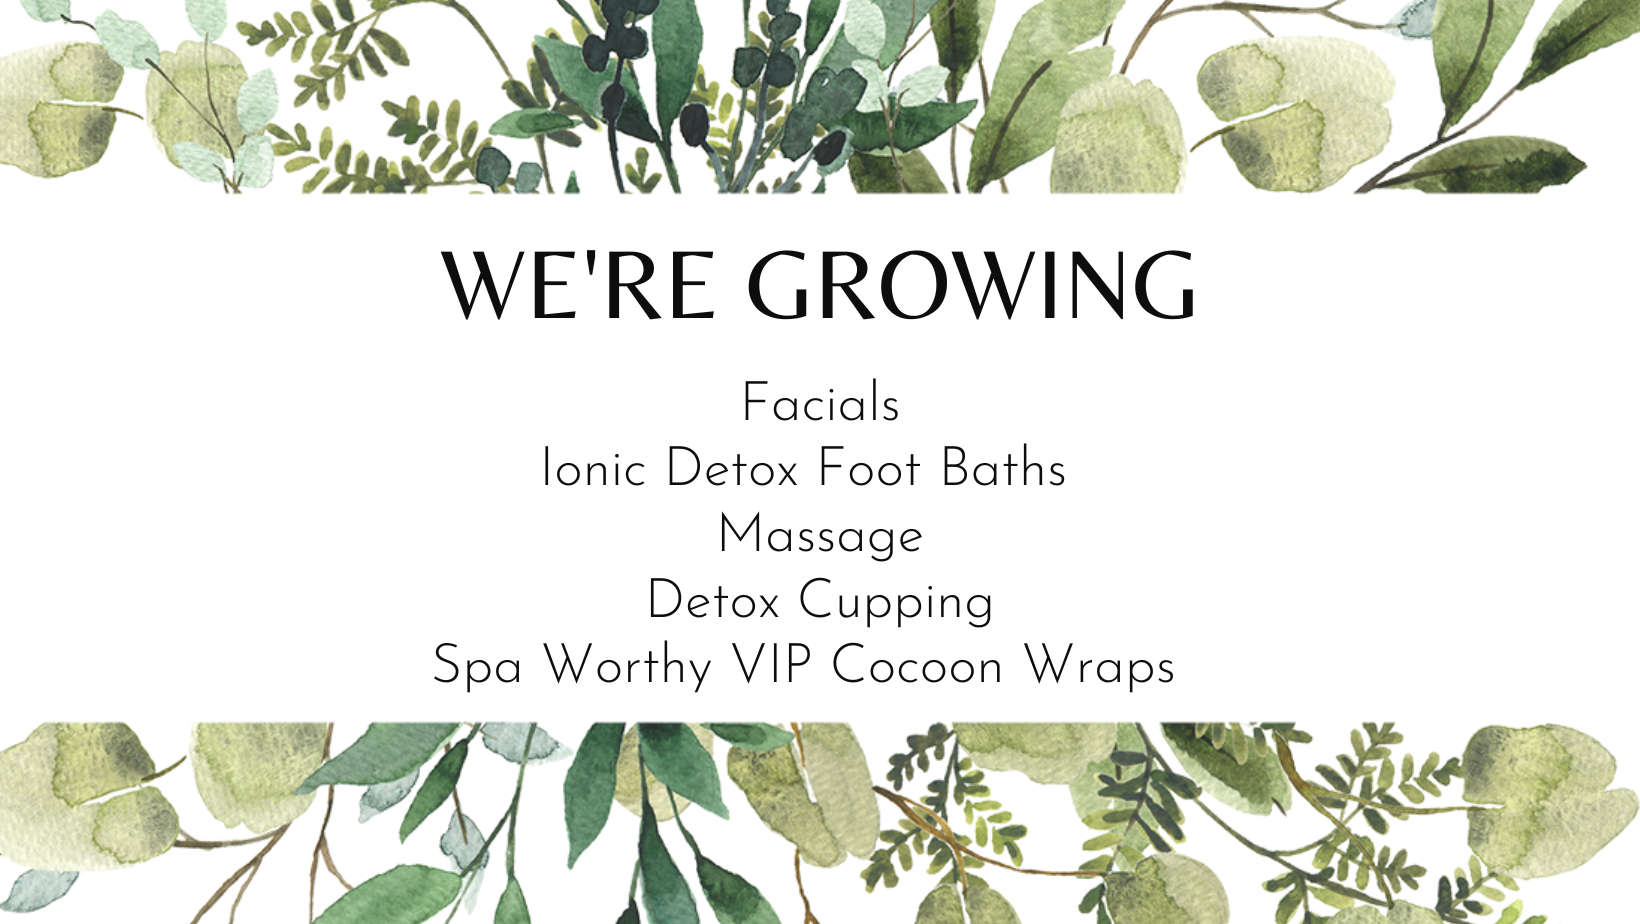 We're Growing! Facials, Ionic Detox Foot Baths, Massage, Detox Cupping, Spa Worthy VIP Cocoon Wraps